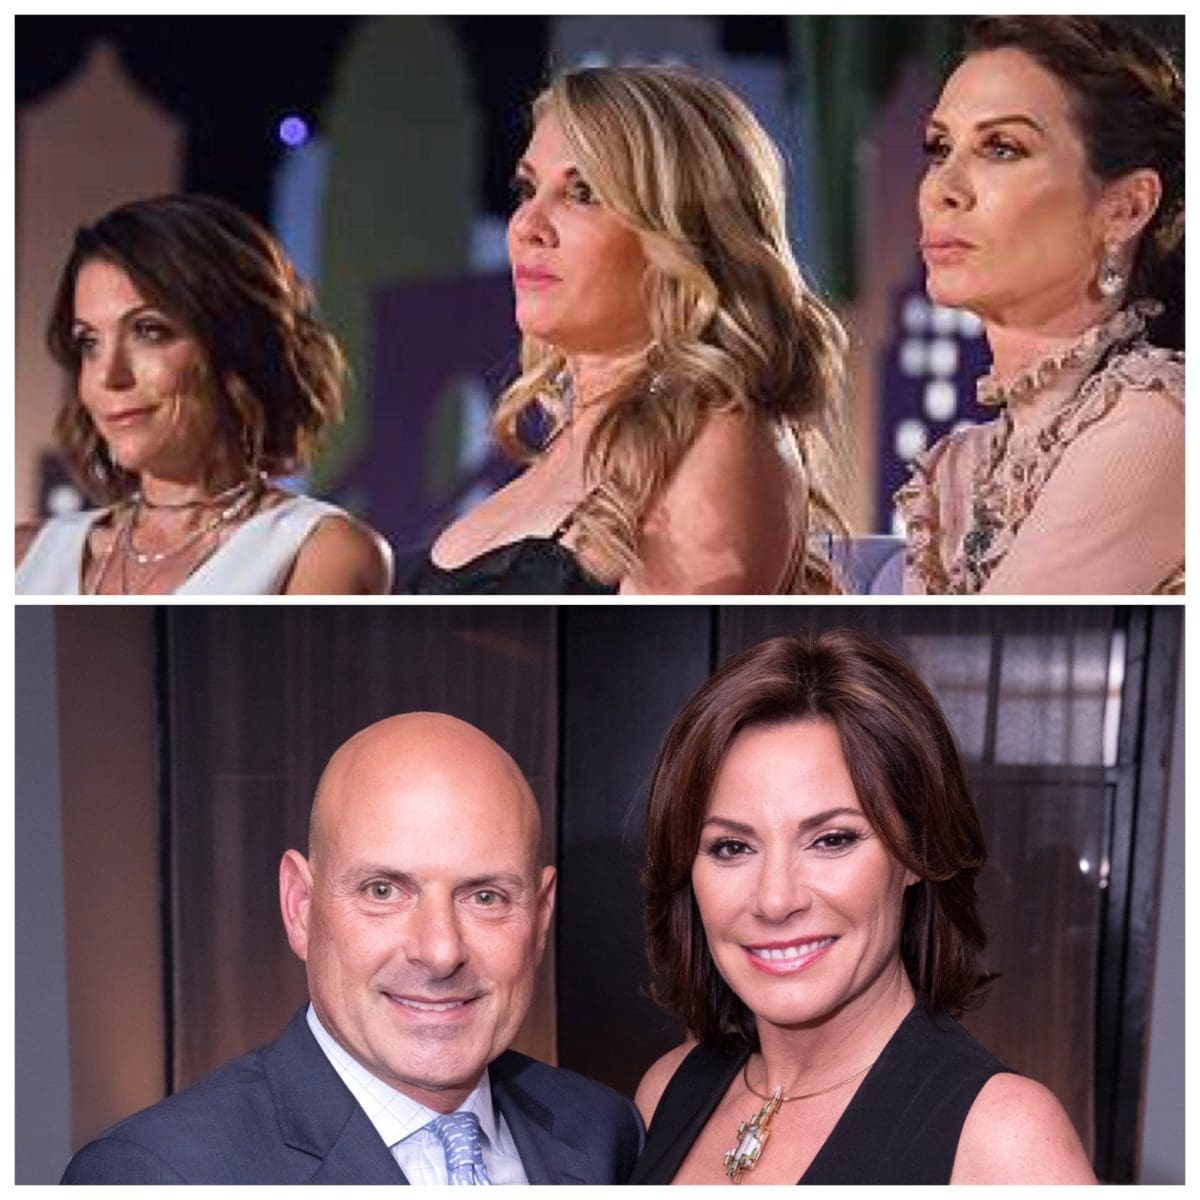 Carole Radziwill , Bethenny Frankel, and Ramona Singer share their honest feelings about Luann de Lesspes and Tom D'Agostino's relationship